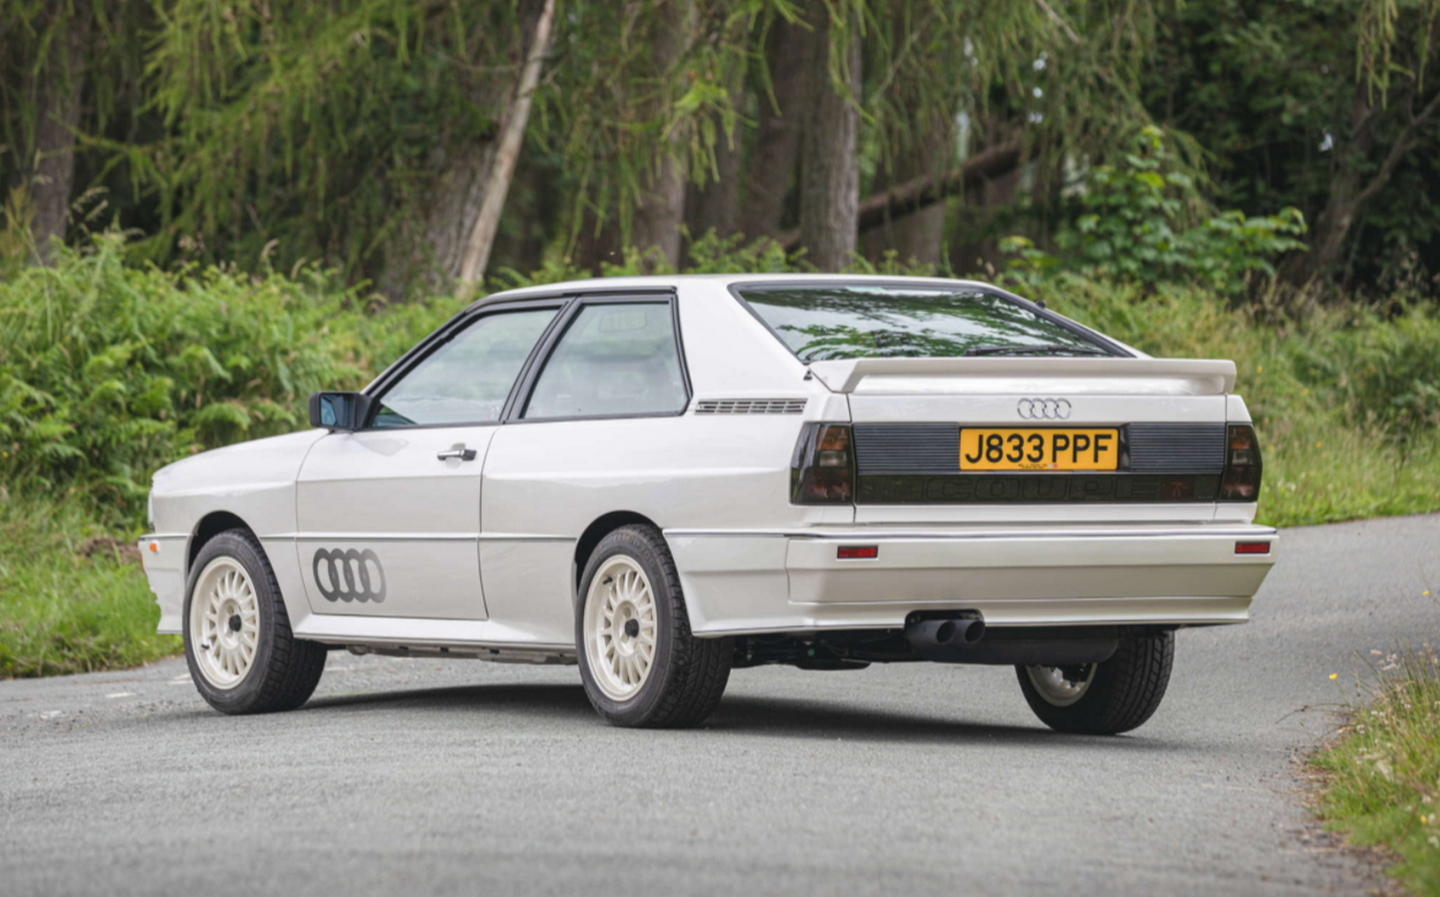 Audi Quattro sells for record price of £163,125 at auction